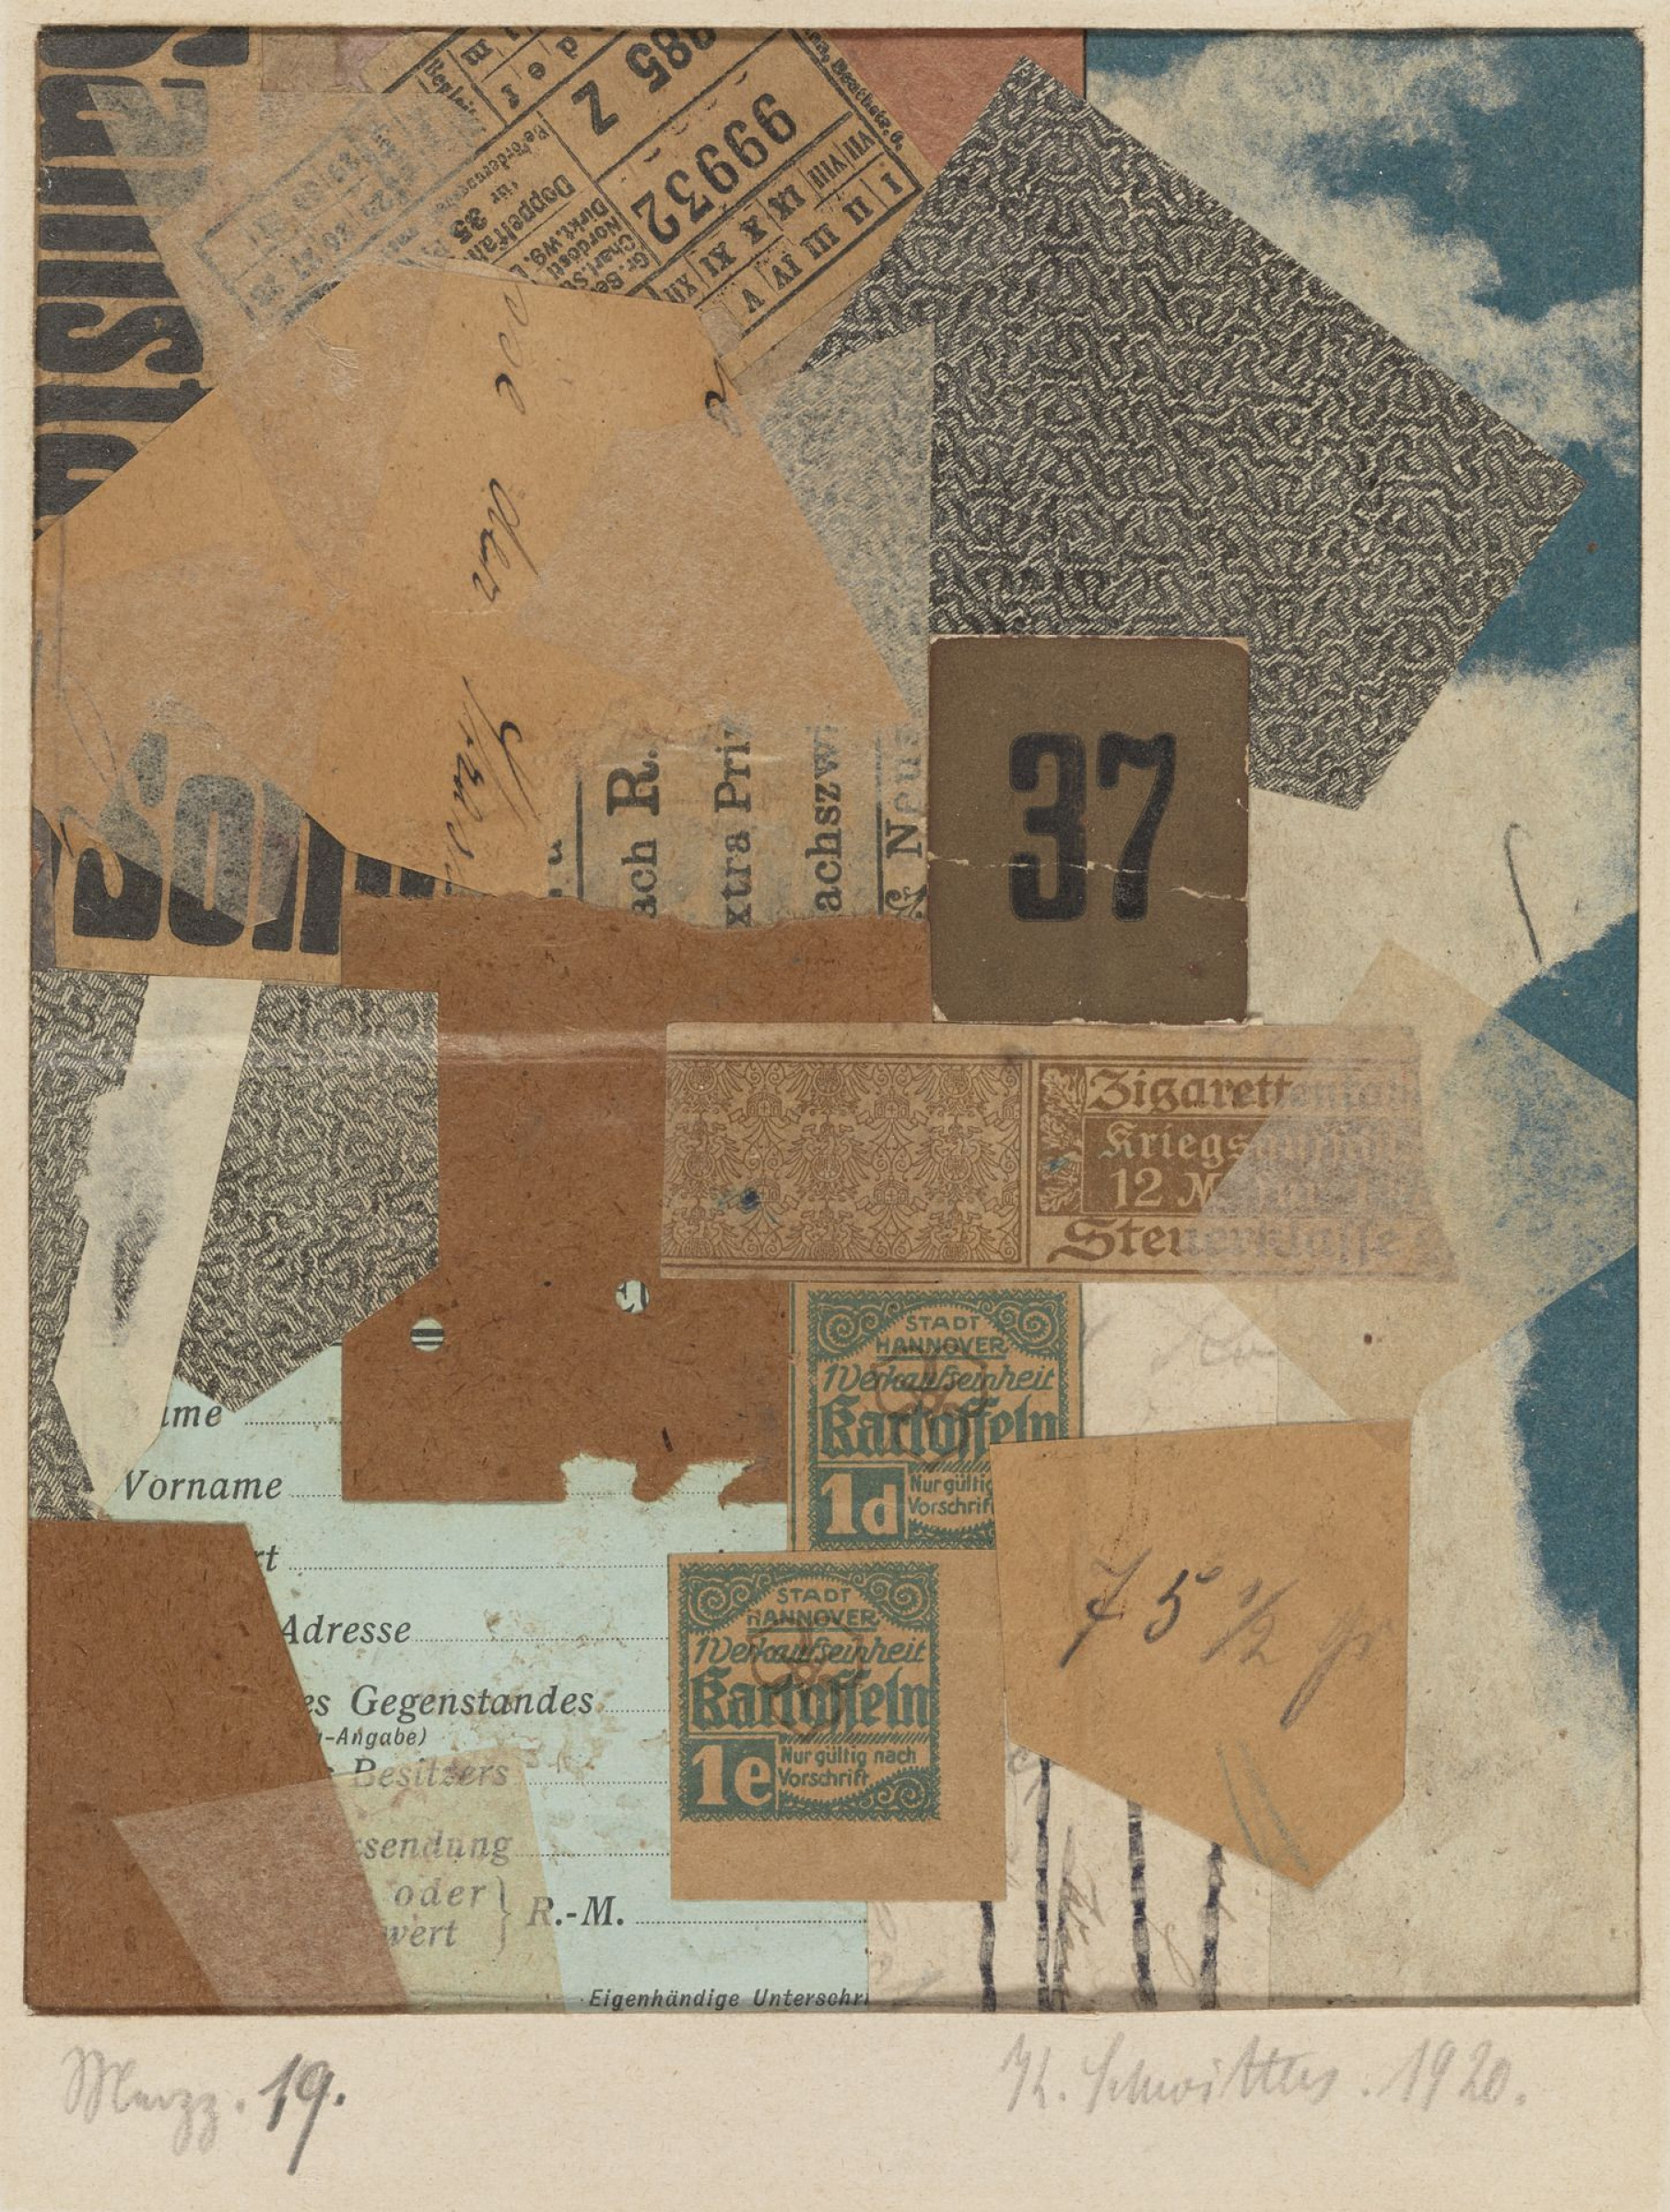 Buy a digital copy: Kurt Schwitters - Collage 19, New Haven | Arthive